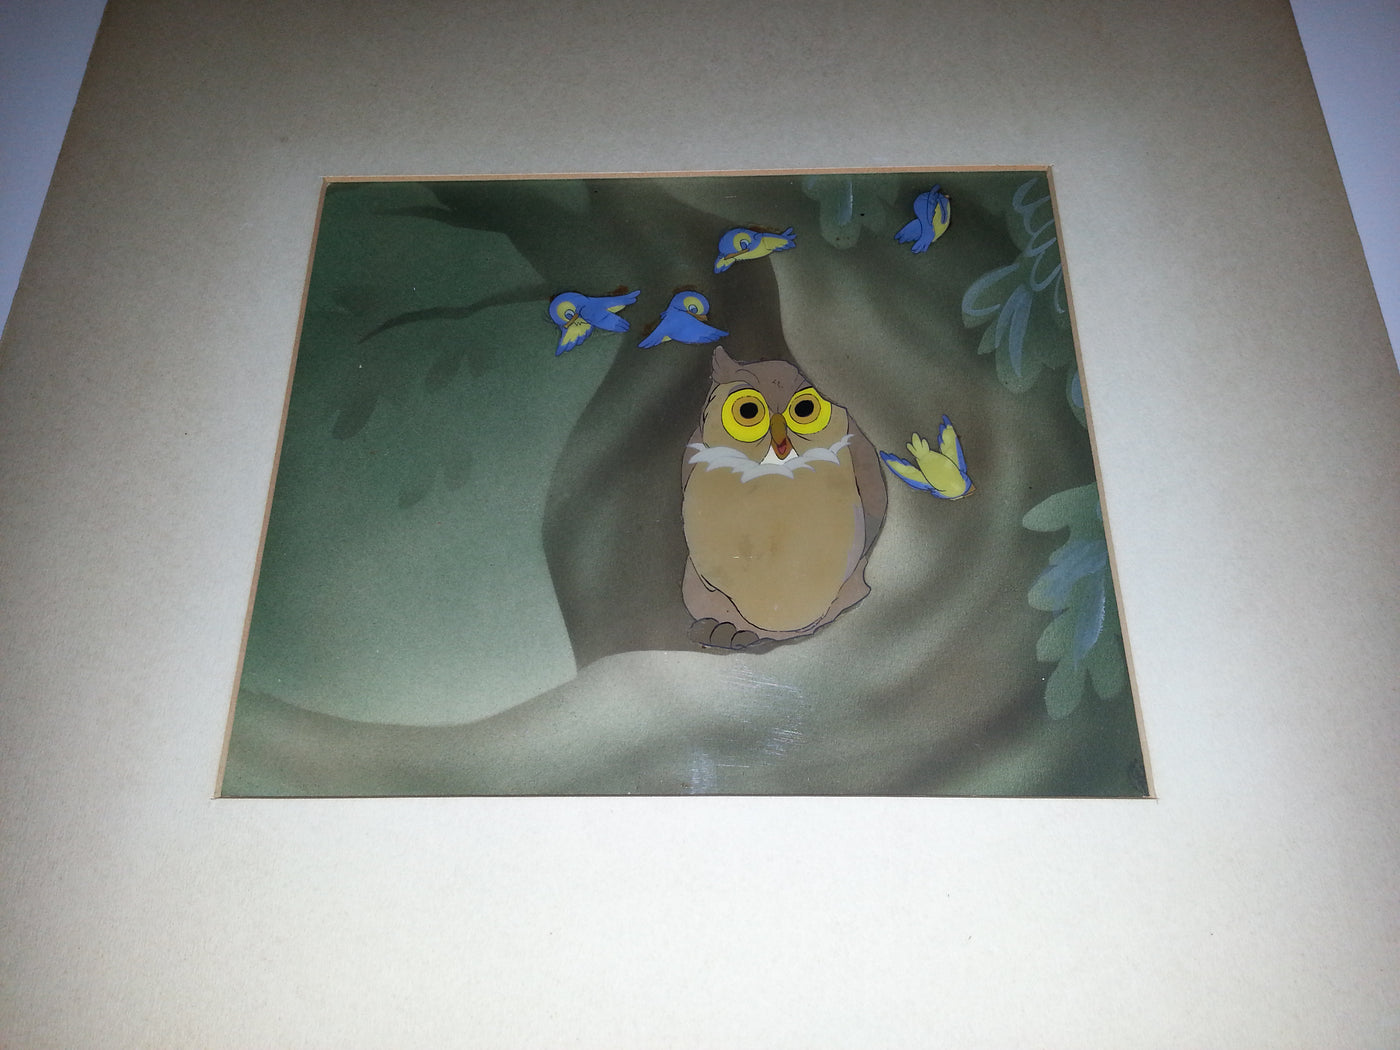 Disney Animation Production Cel Featuring Friend Owl and Birds on Courvoisier Background